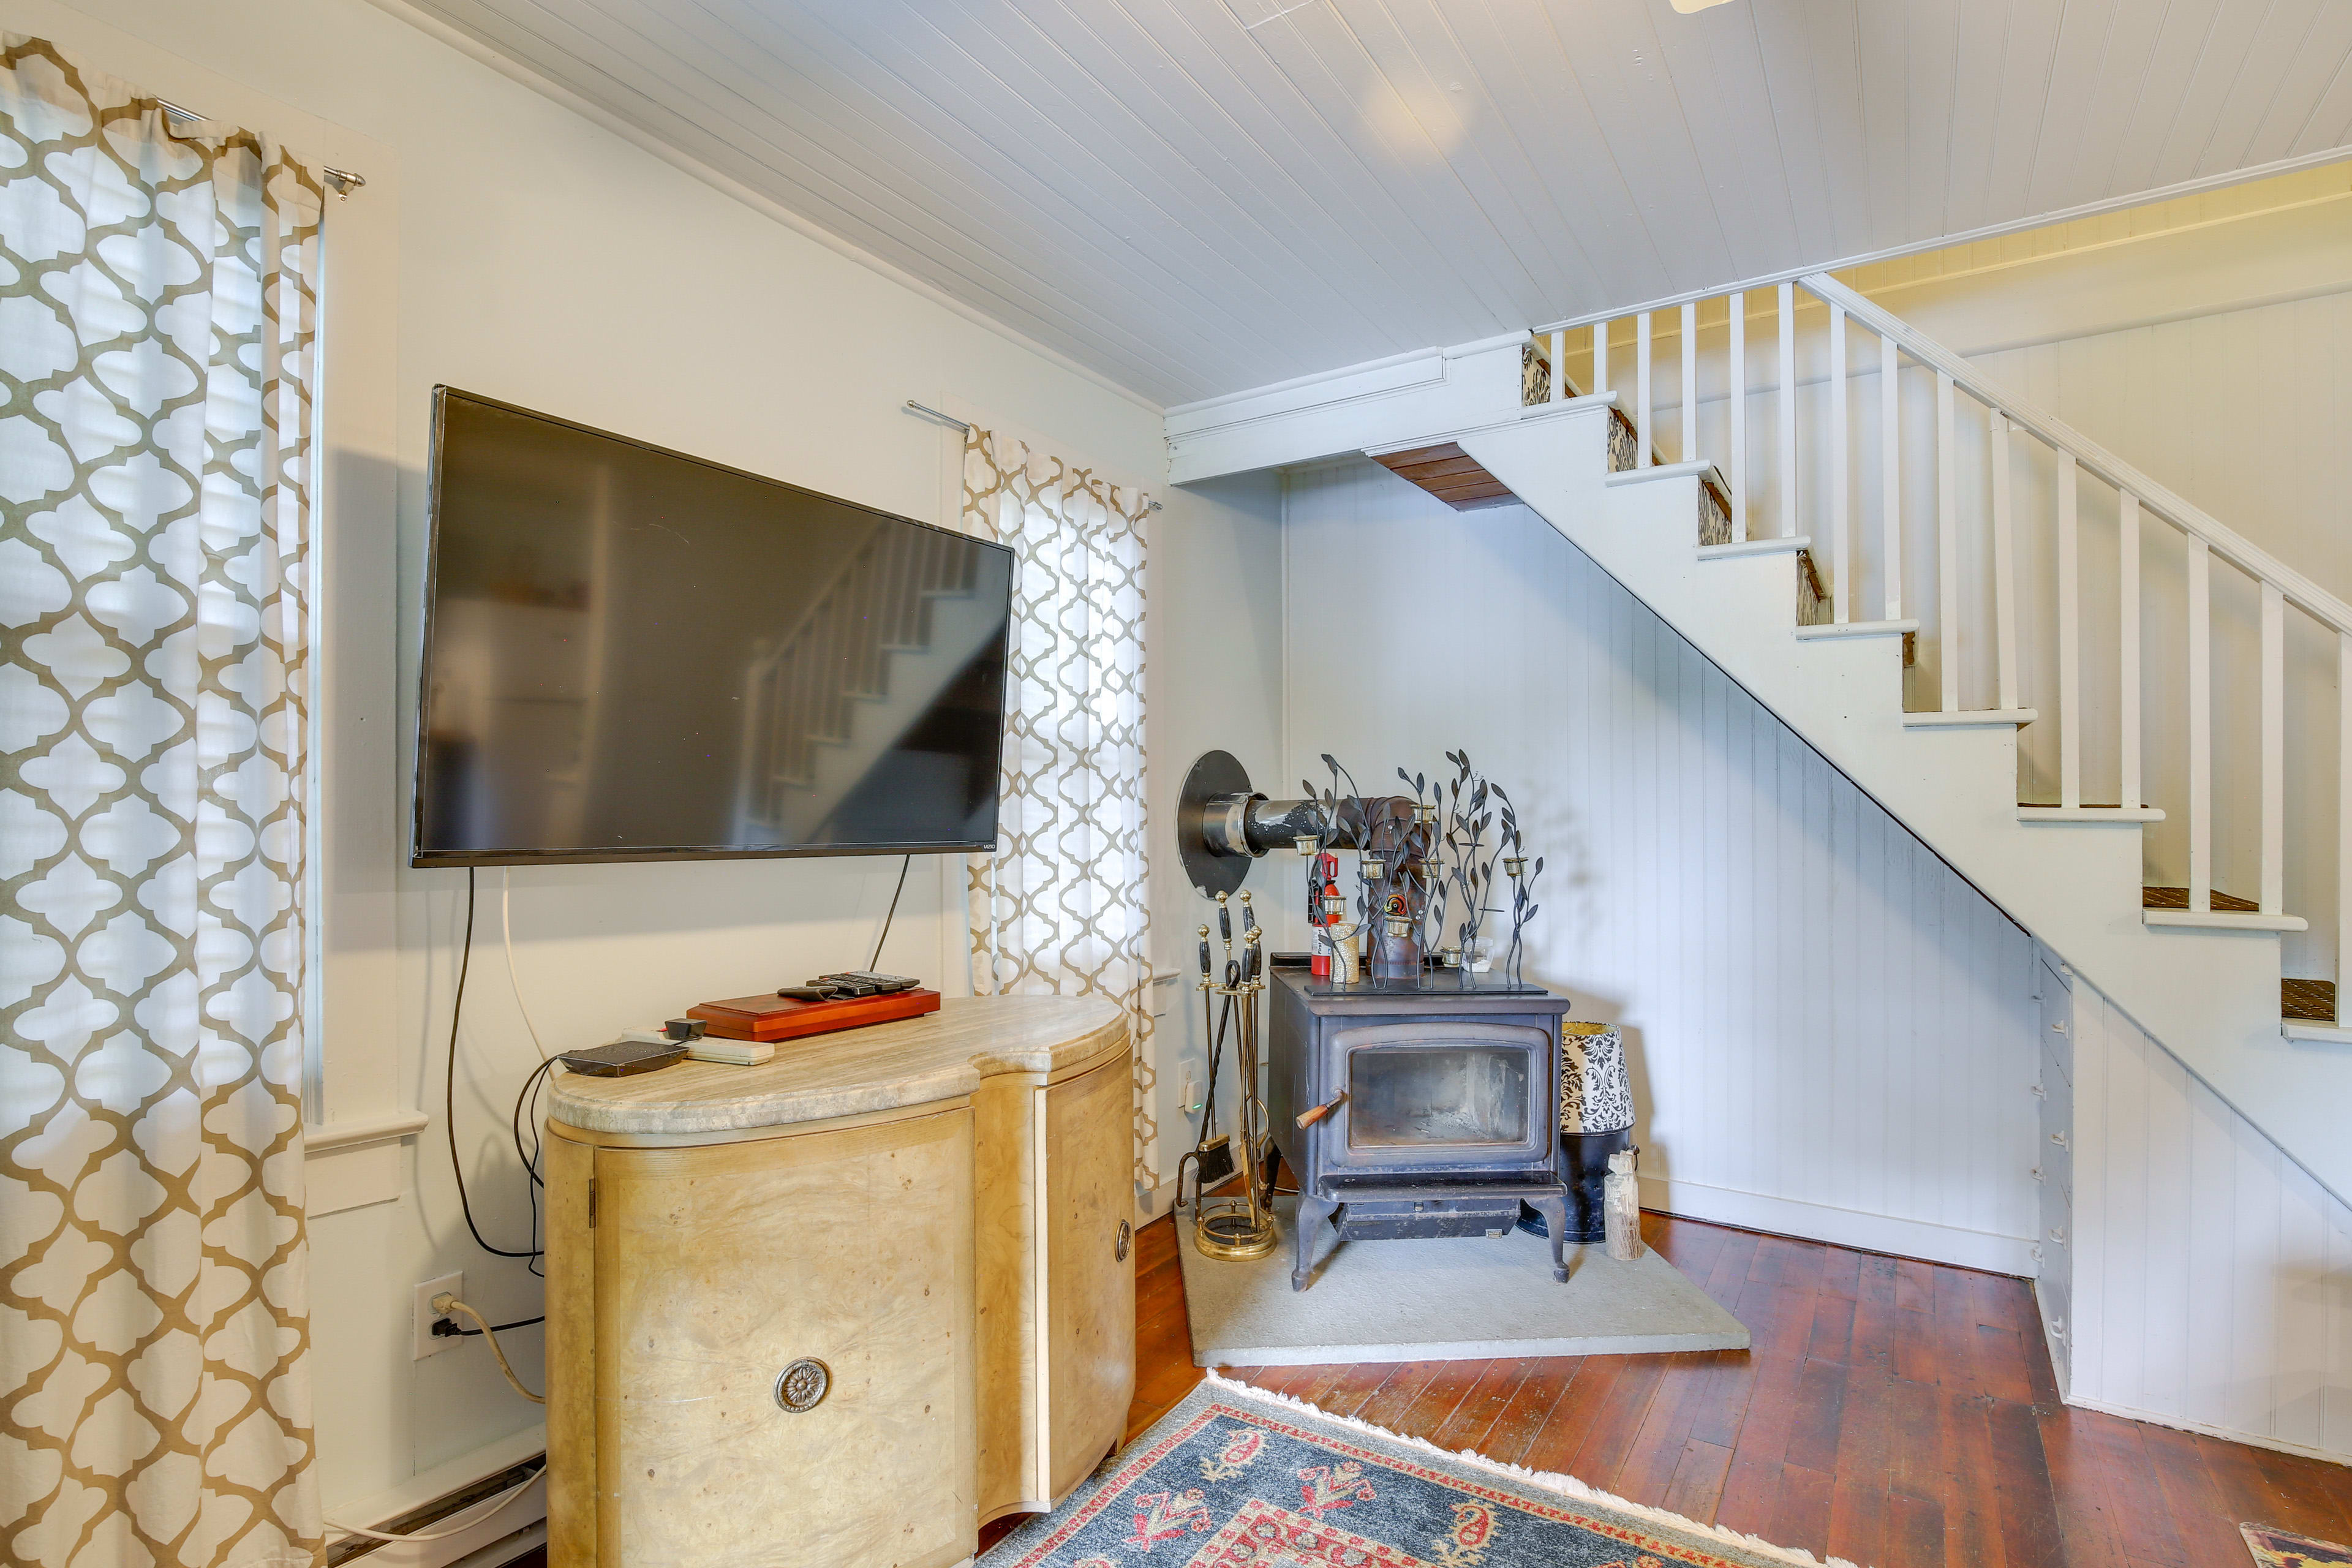 Living Room | Wood-Burning Stove | Window A/C Unit | Stairs to Access 2nd Floor